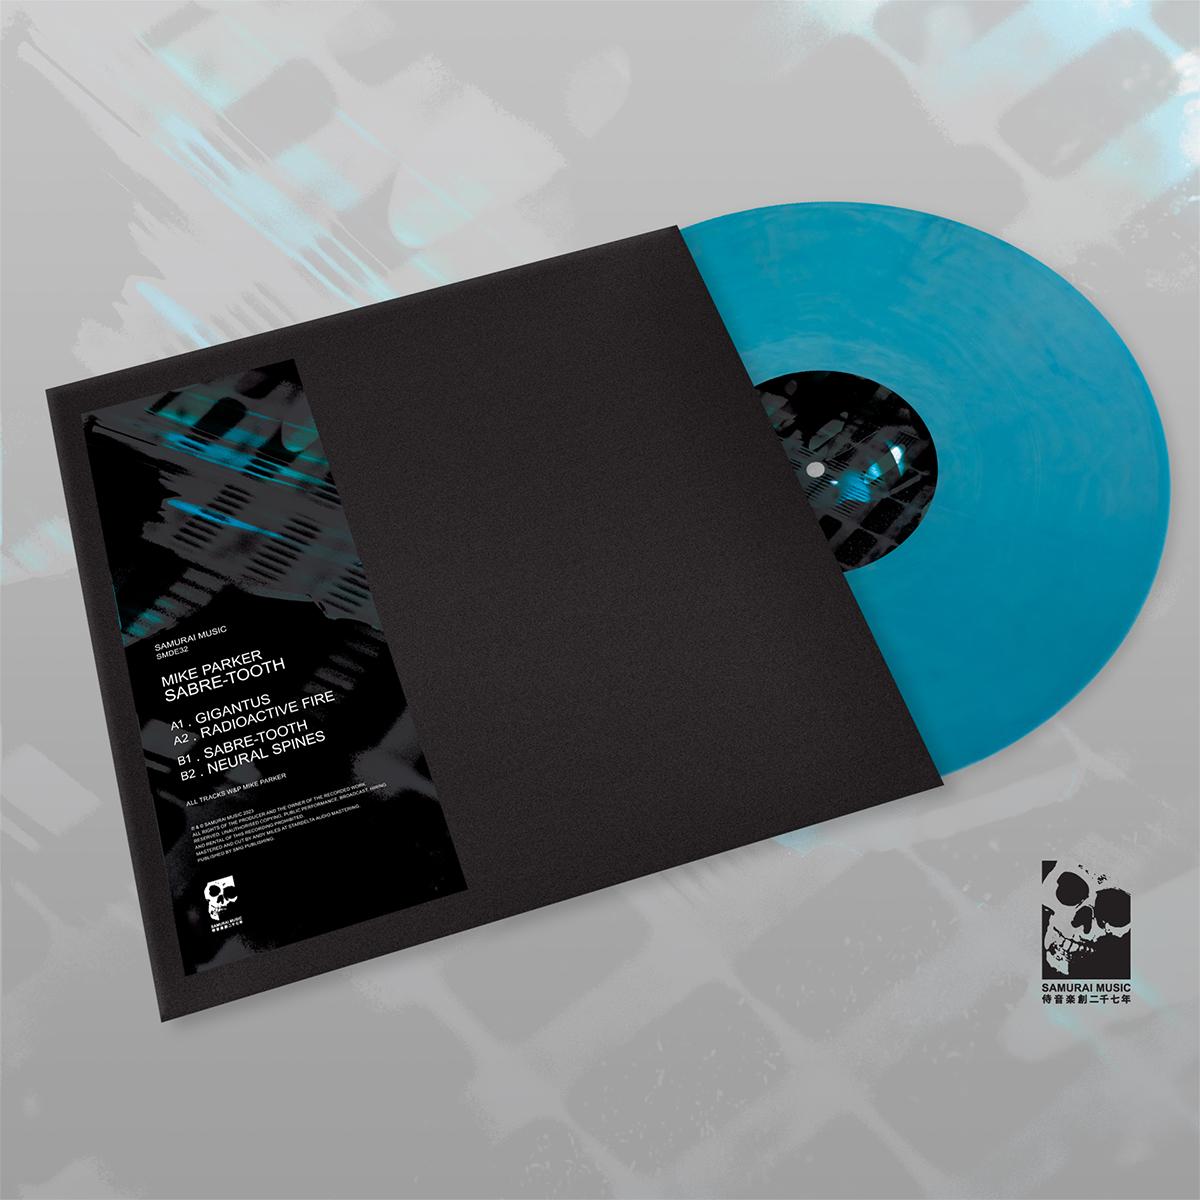 MIKE PARKER 'SABRE-TOOTH' 12" (BLUE WAX)